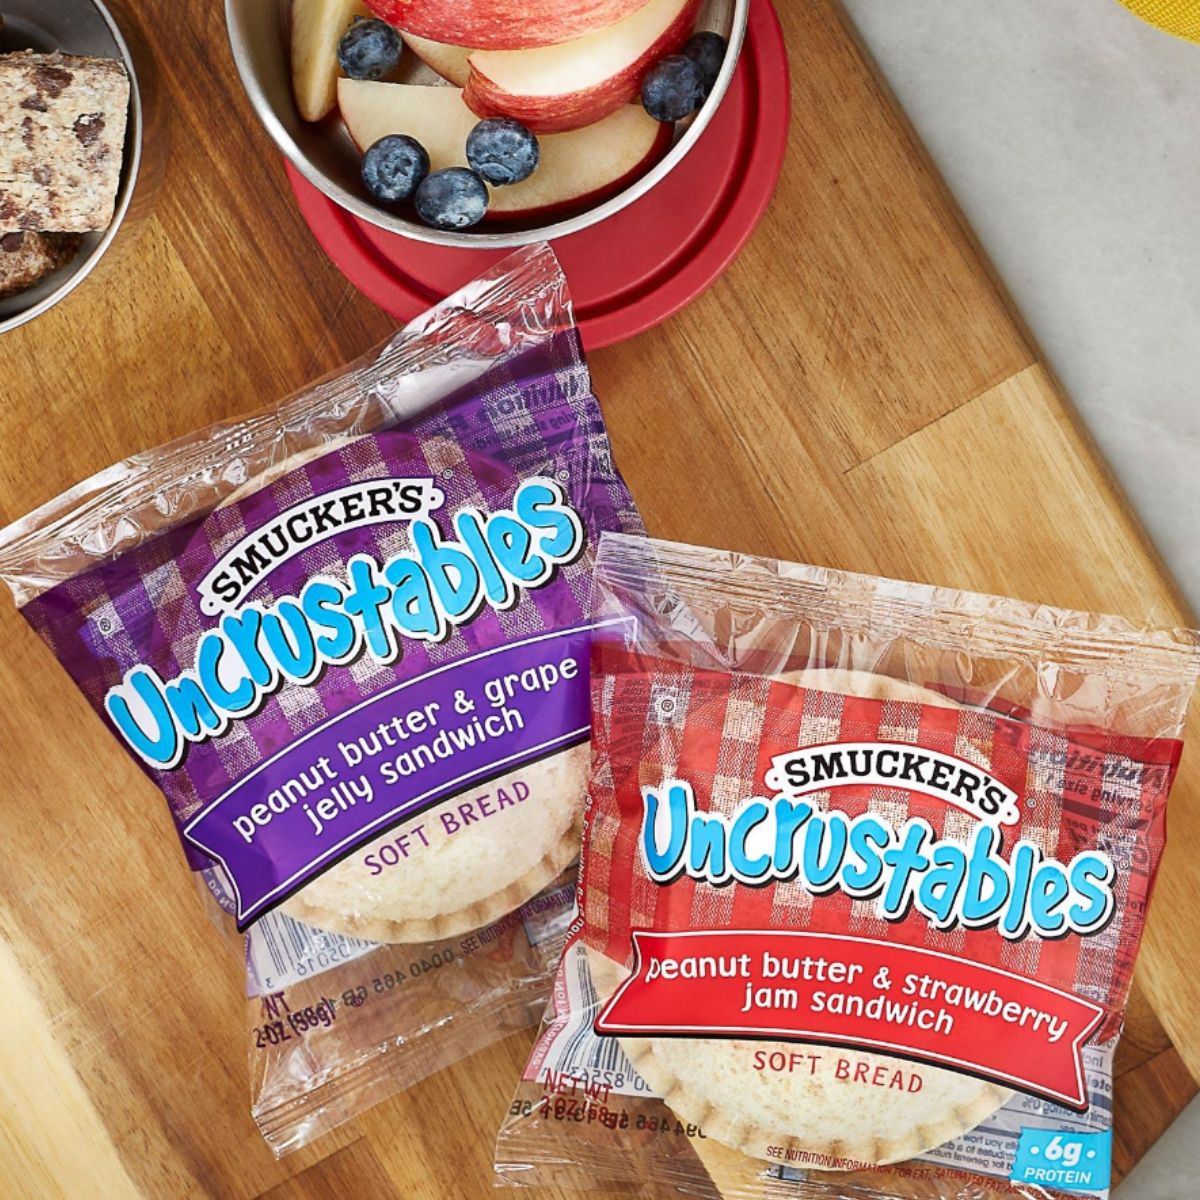 Two uncrustables sandwiches inside their plastic bags on top of a wooden cutting board.